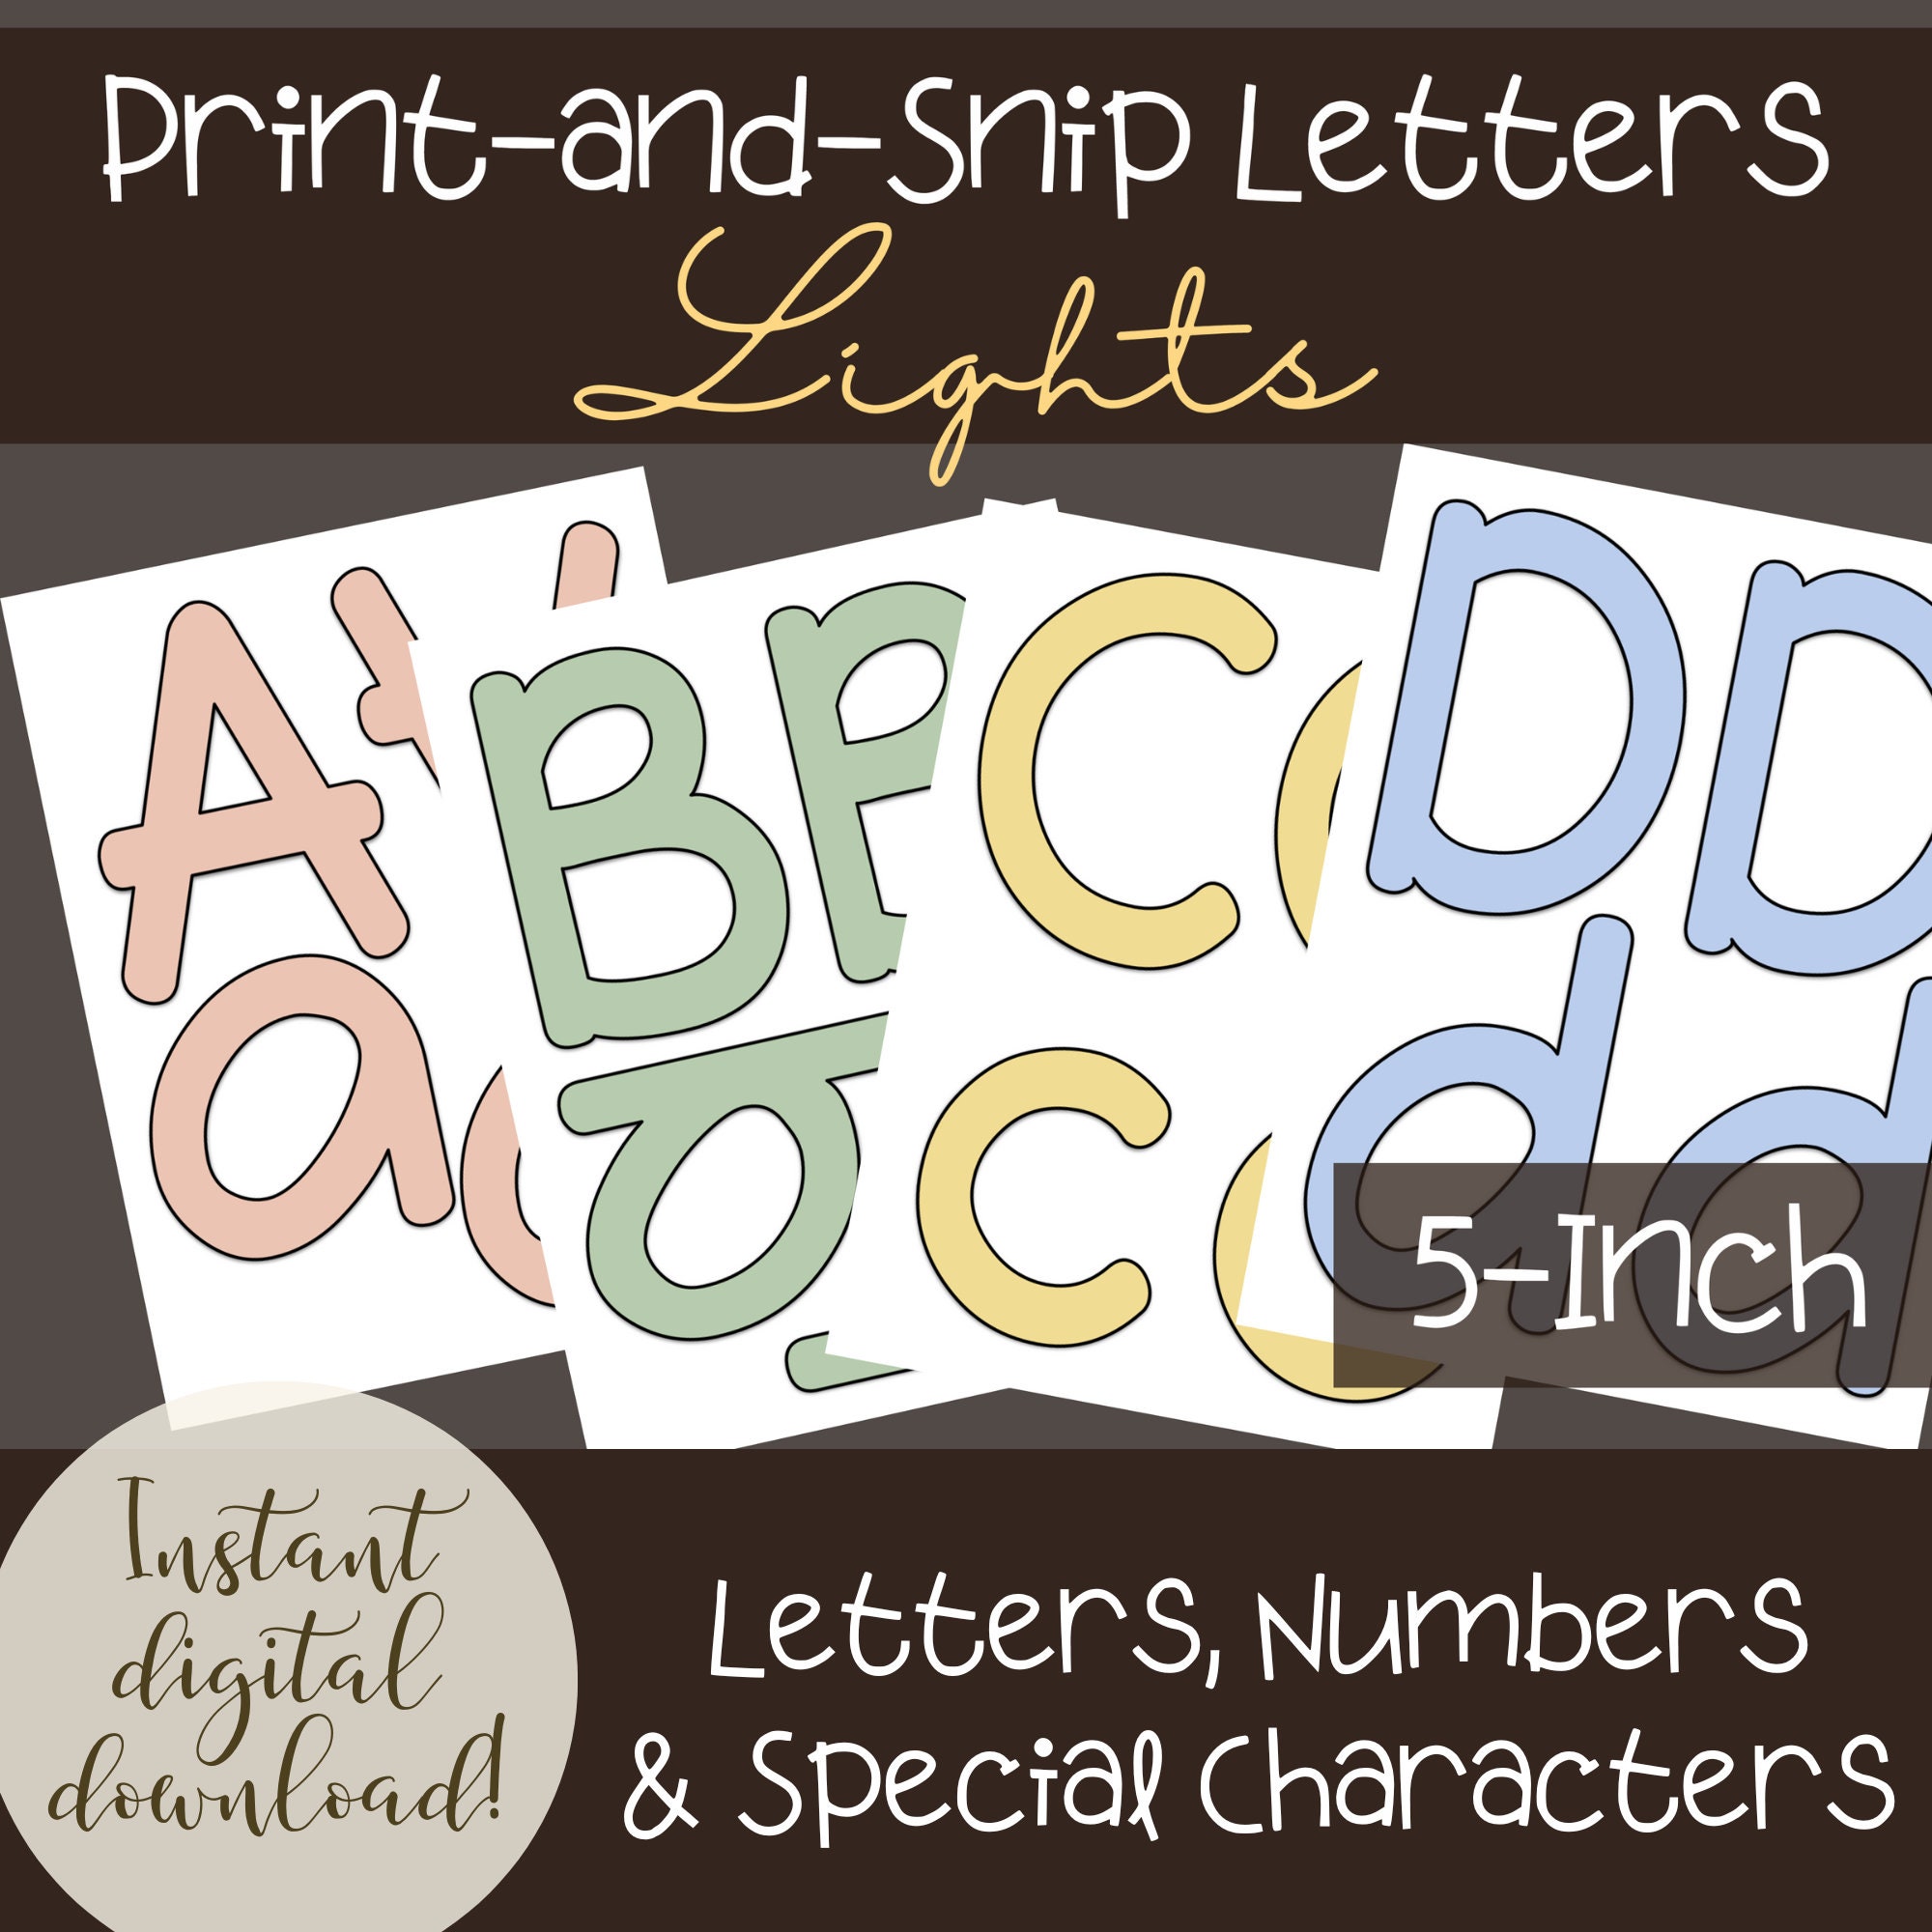 Printable Letters & Numbers for Bulletin Boards and Signs, 4 PDF Sets,  Light Colors, Banners, Print and Cut, Classroom, Download, 5 Inches -   Sweden